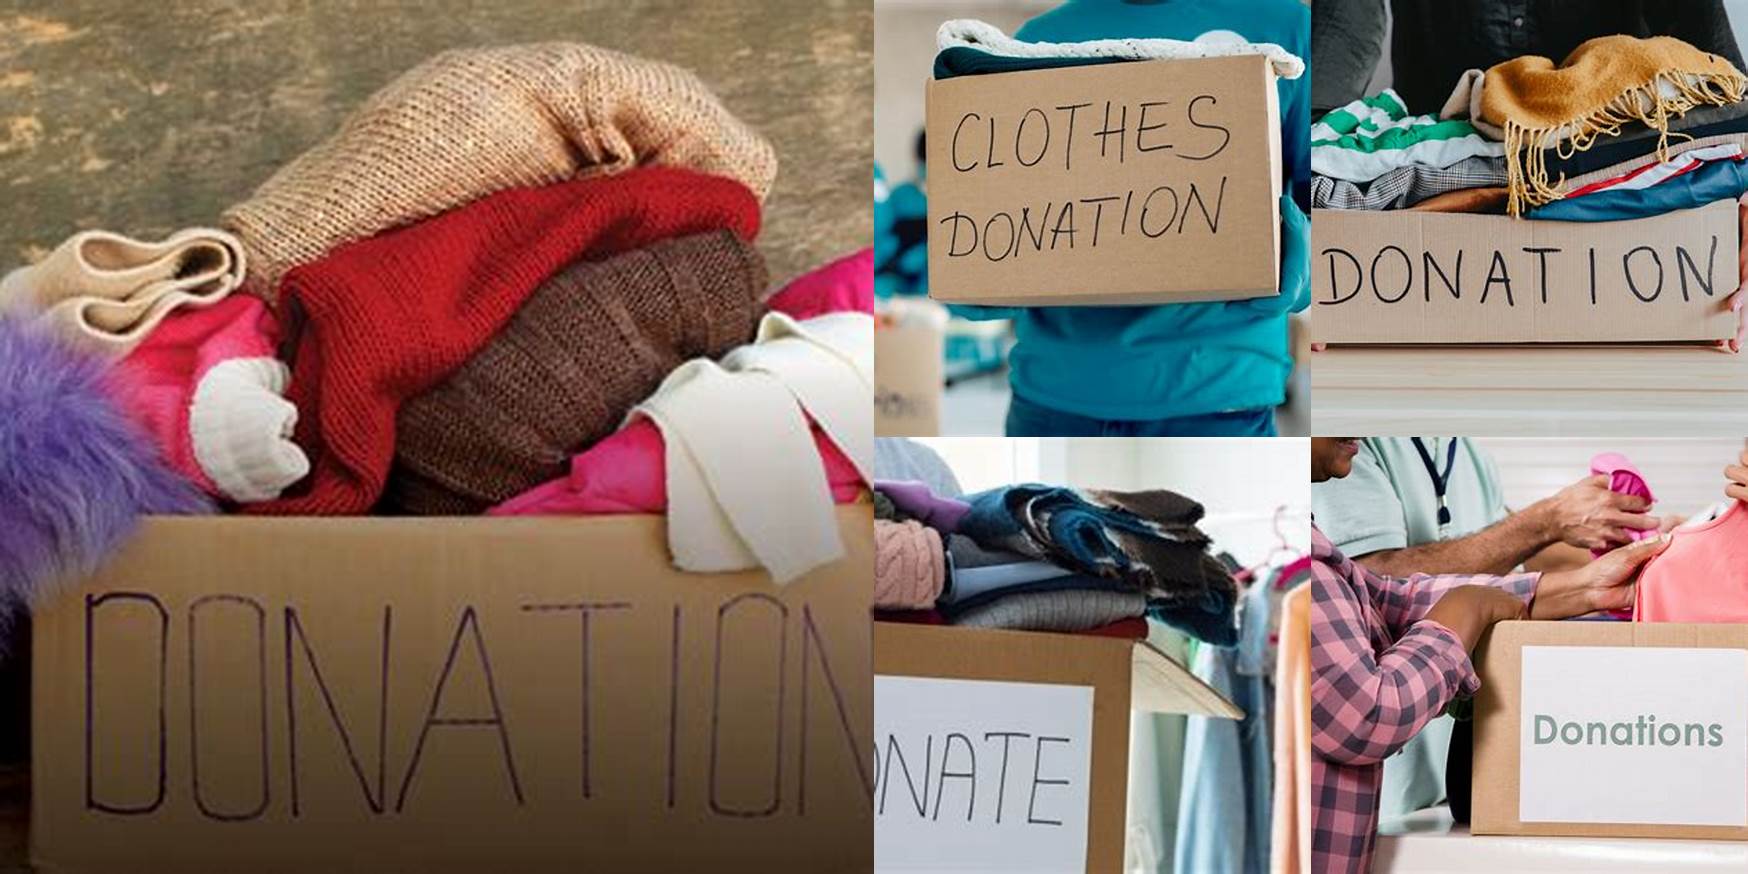 How To Donate Clothes To Homeless